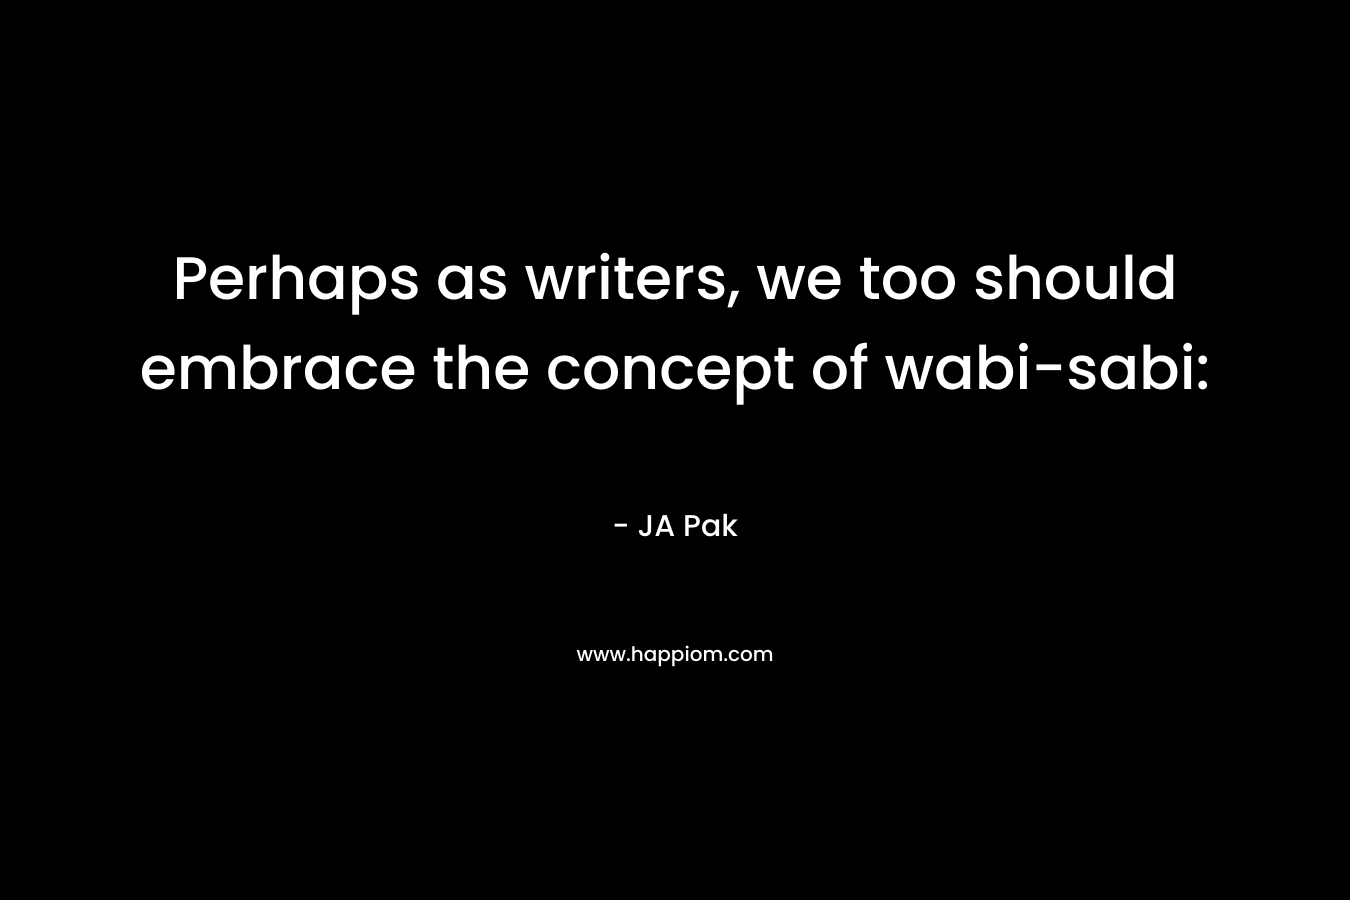 Perhaps as writers, we too should embrace the concept of wabi-sabi: